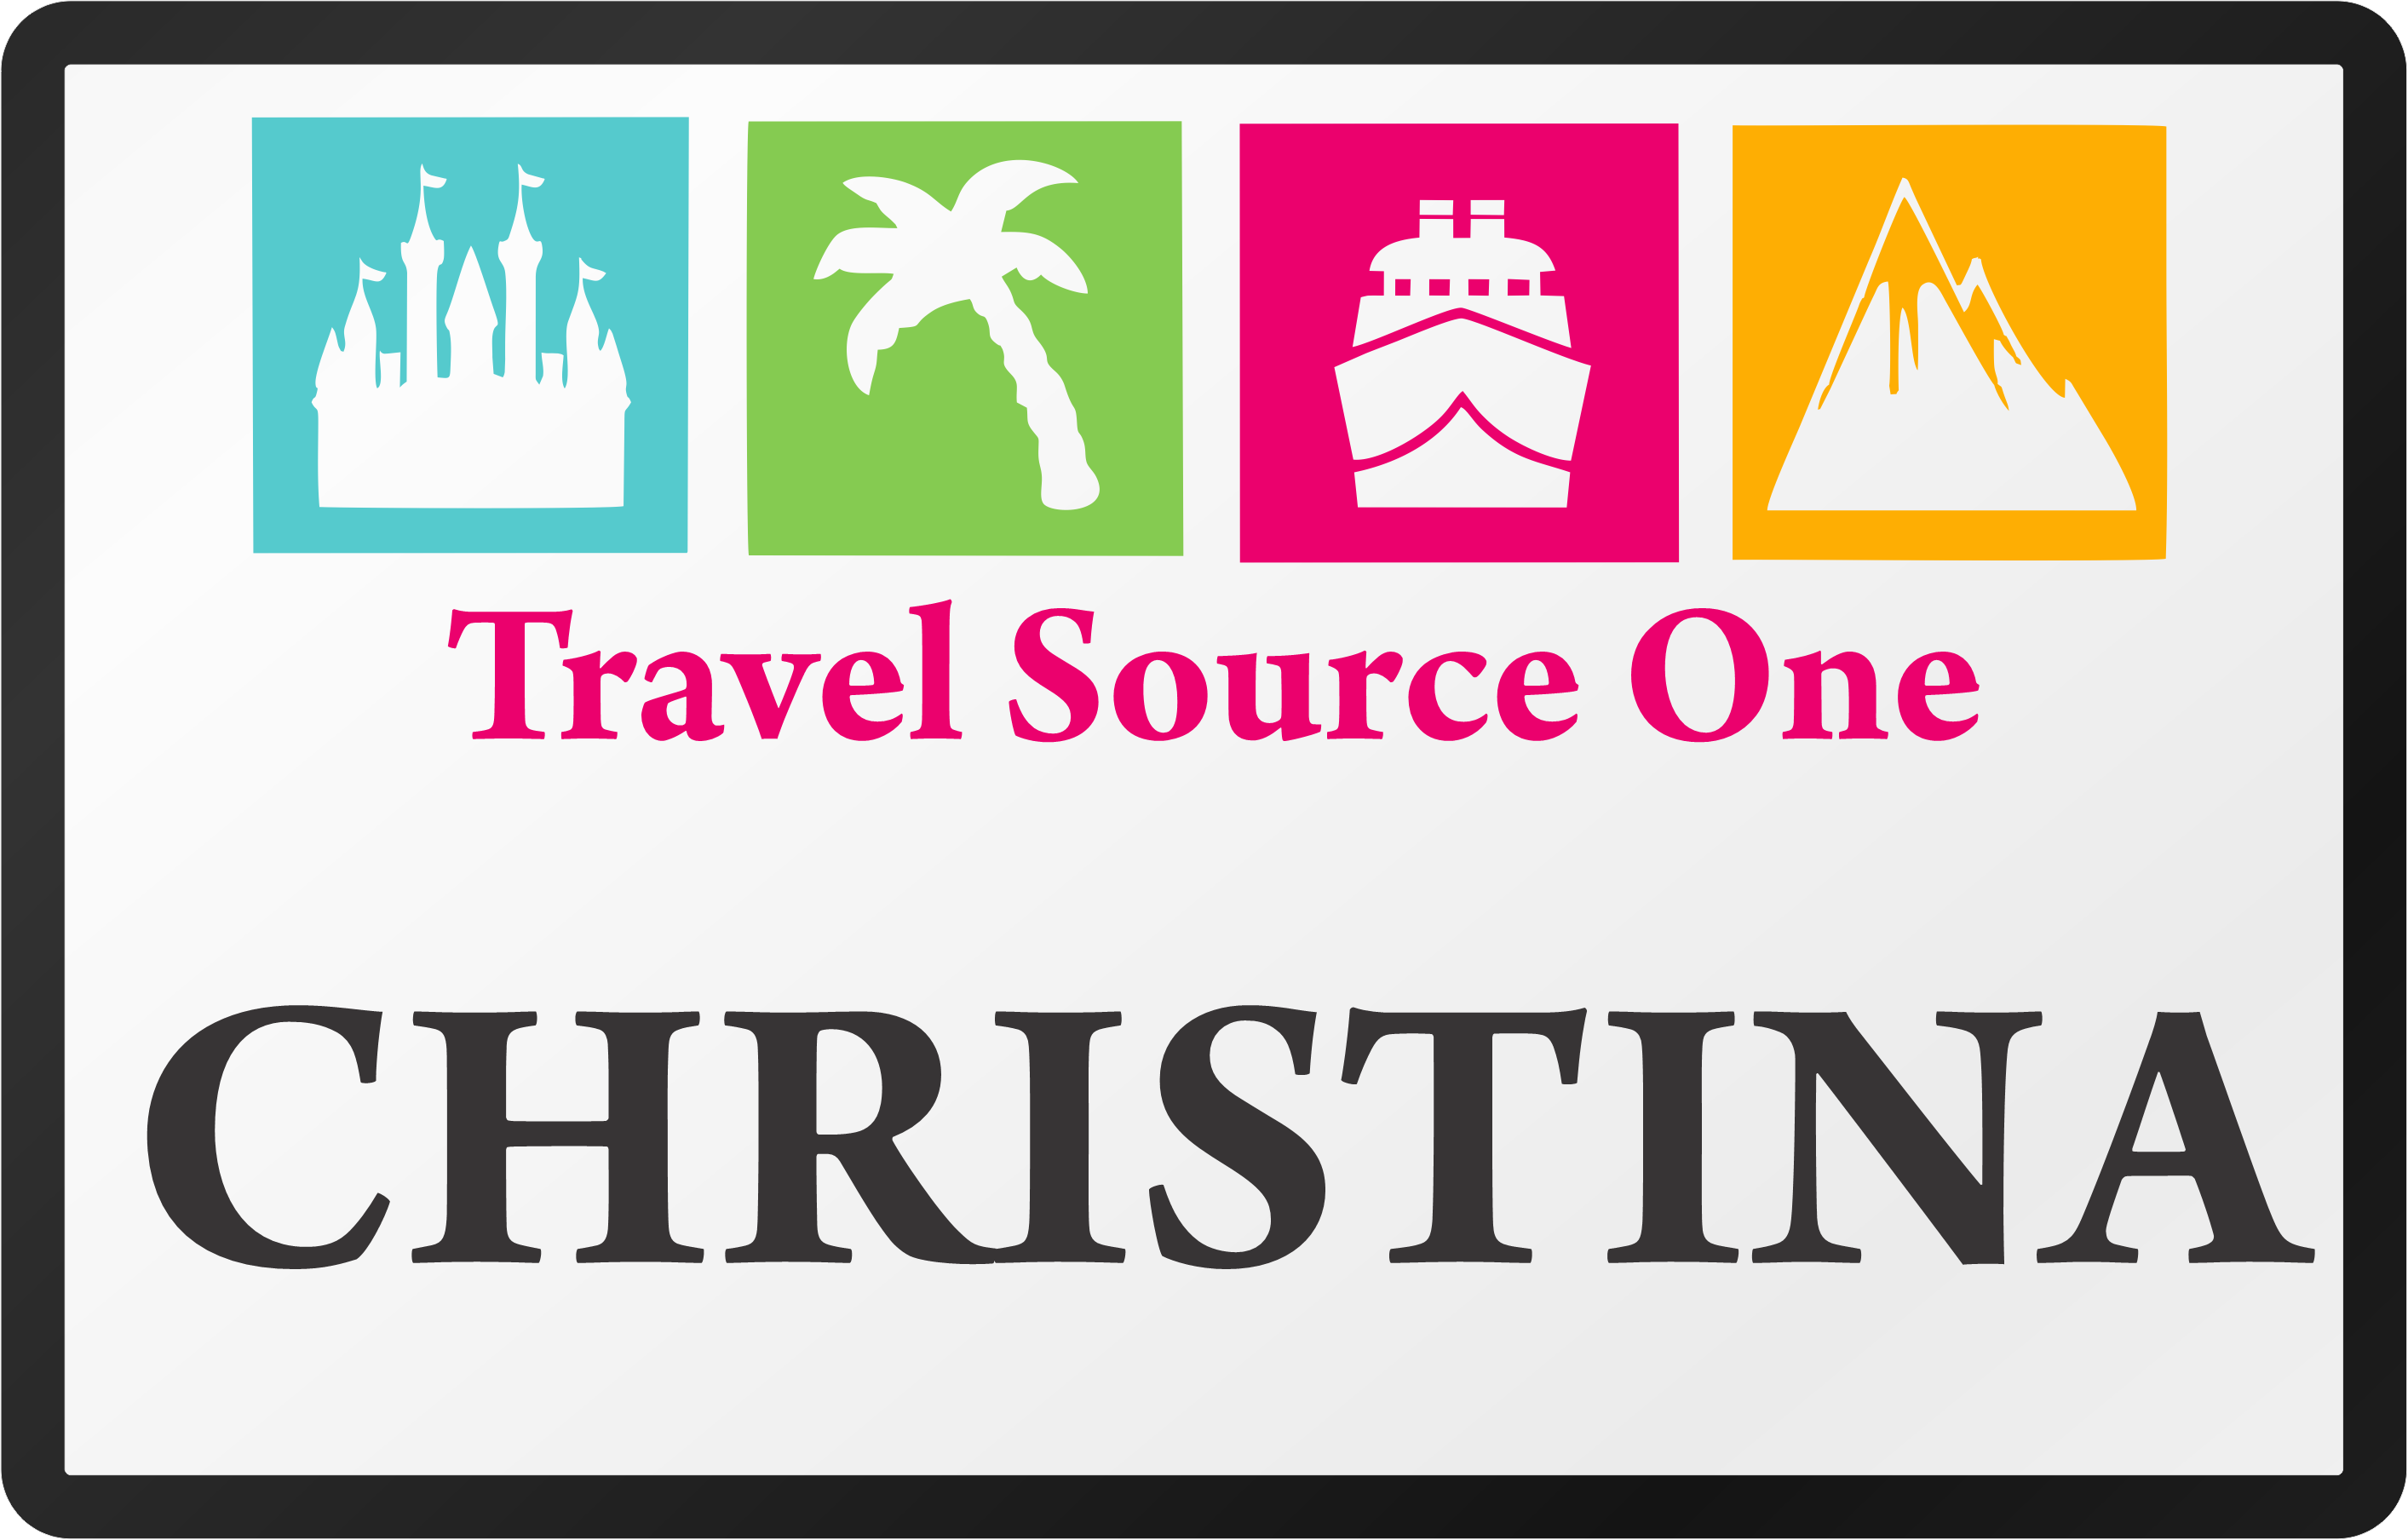 Name badge for Travel Source One rendered in four colors